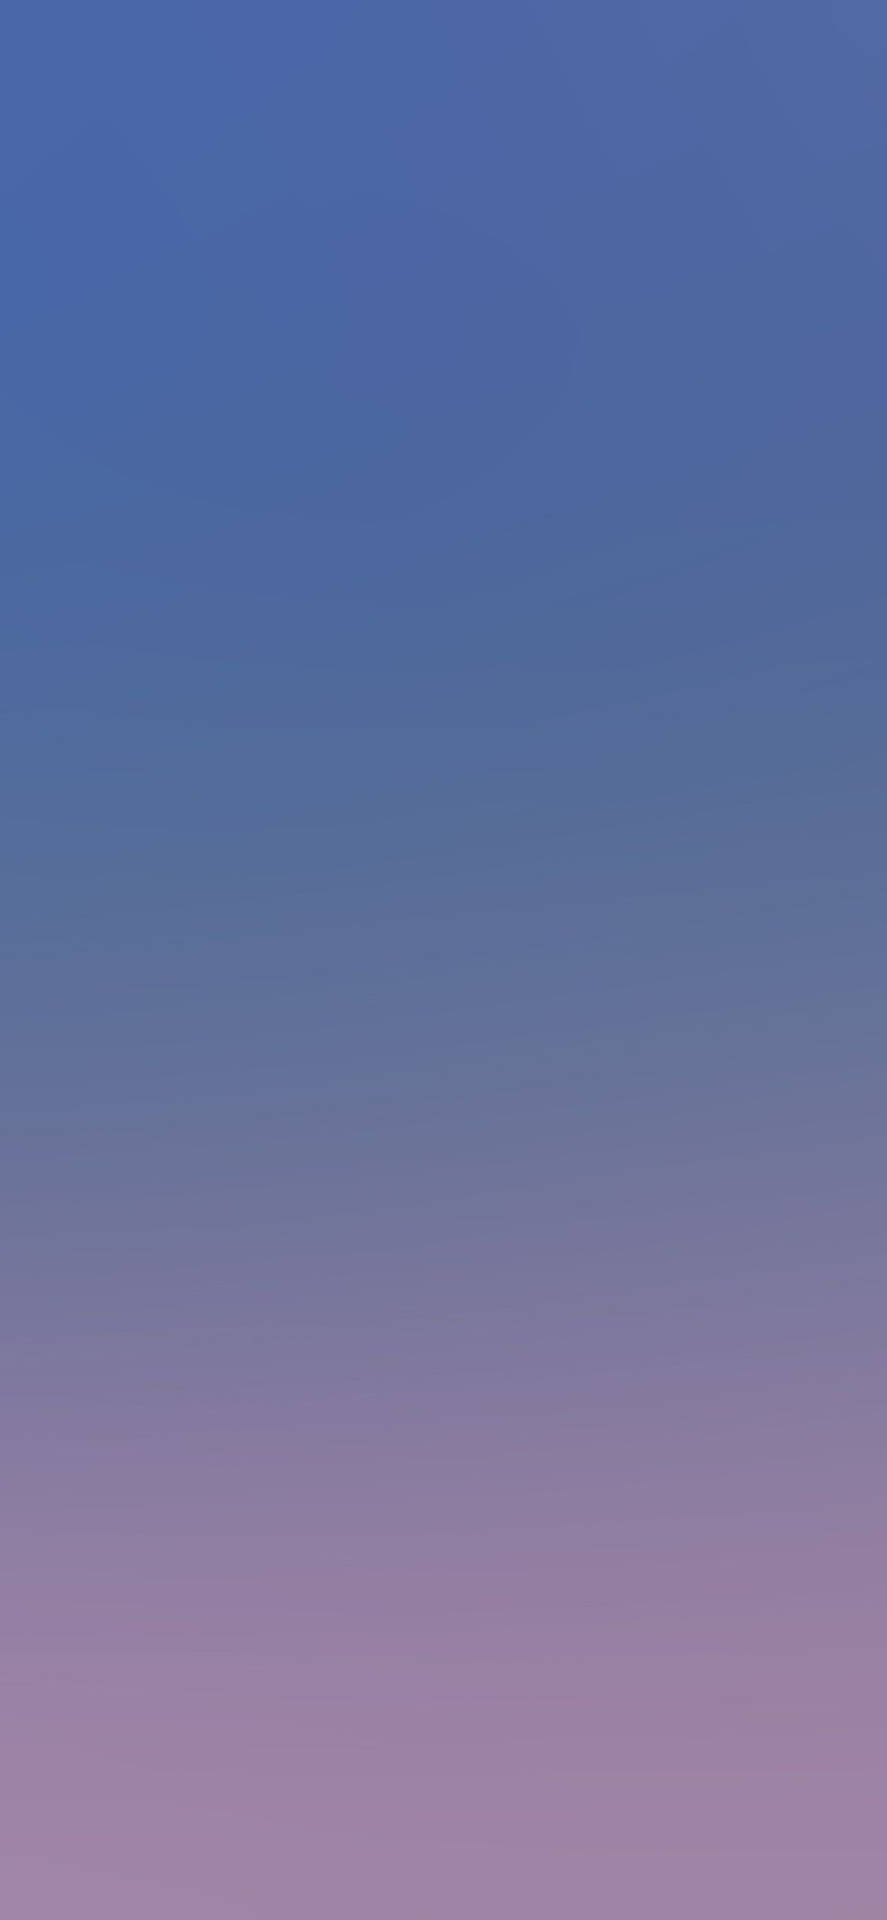 Blue And Light Purple Iphone Gradient Background